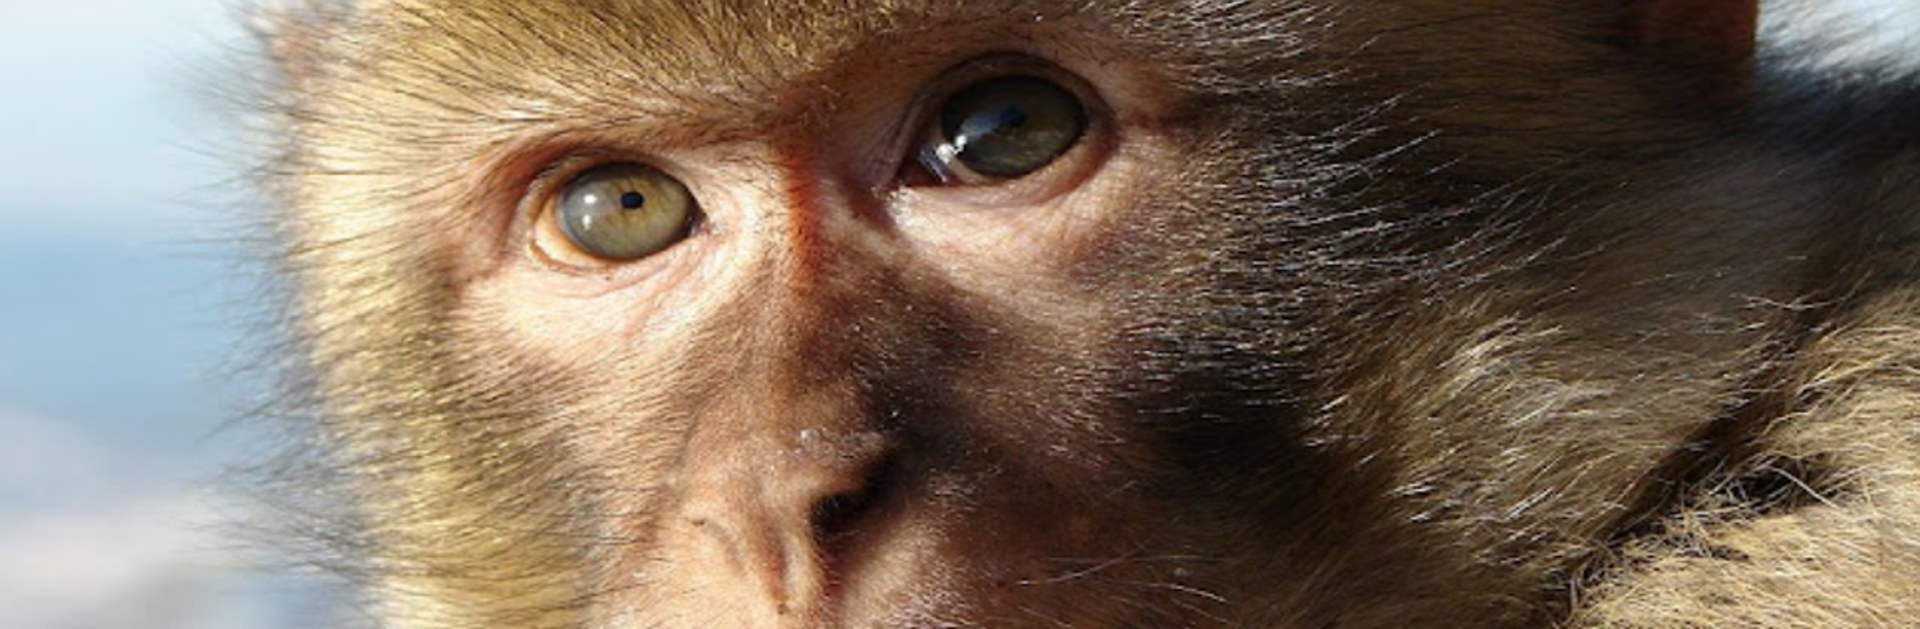 The diet of a fossil macaque in Africa is reconstructed for the first time